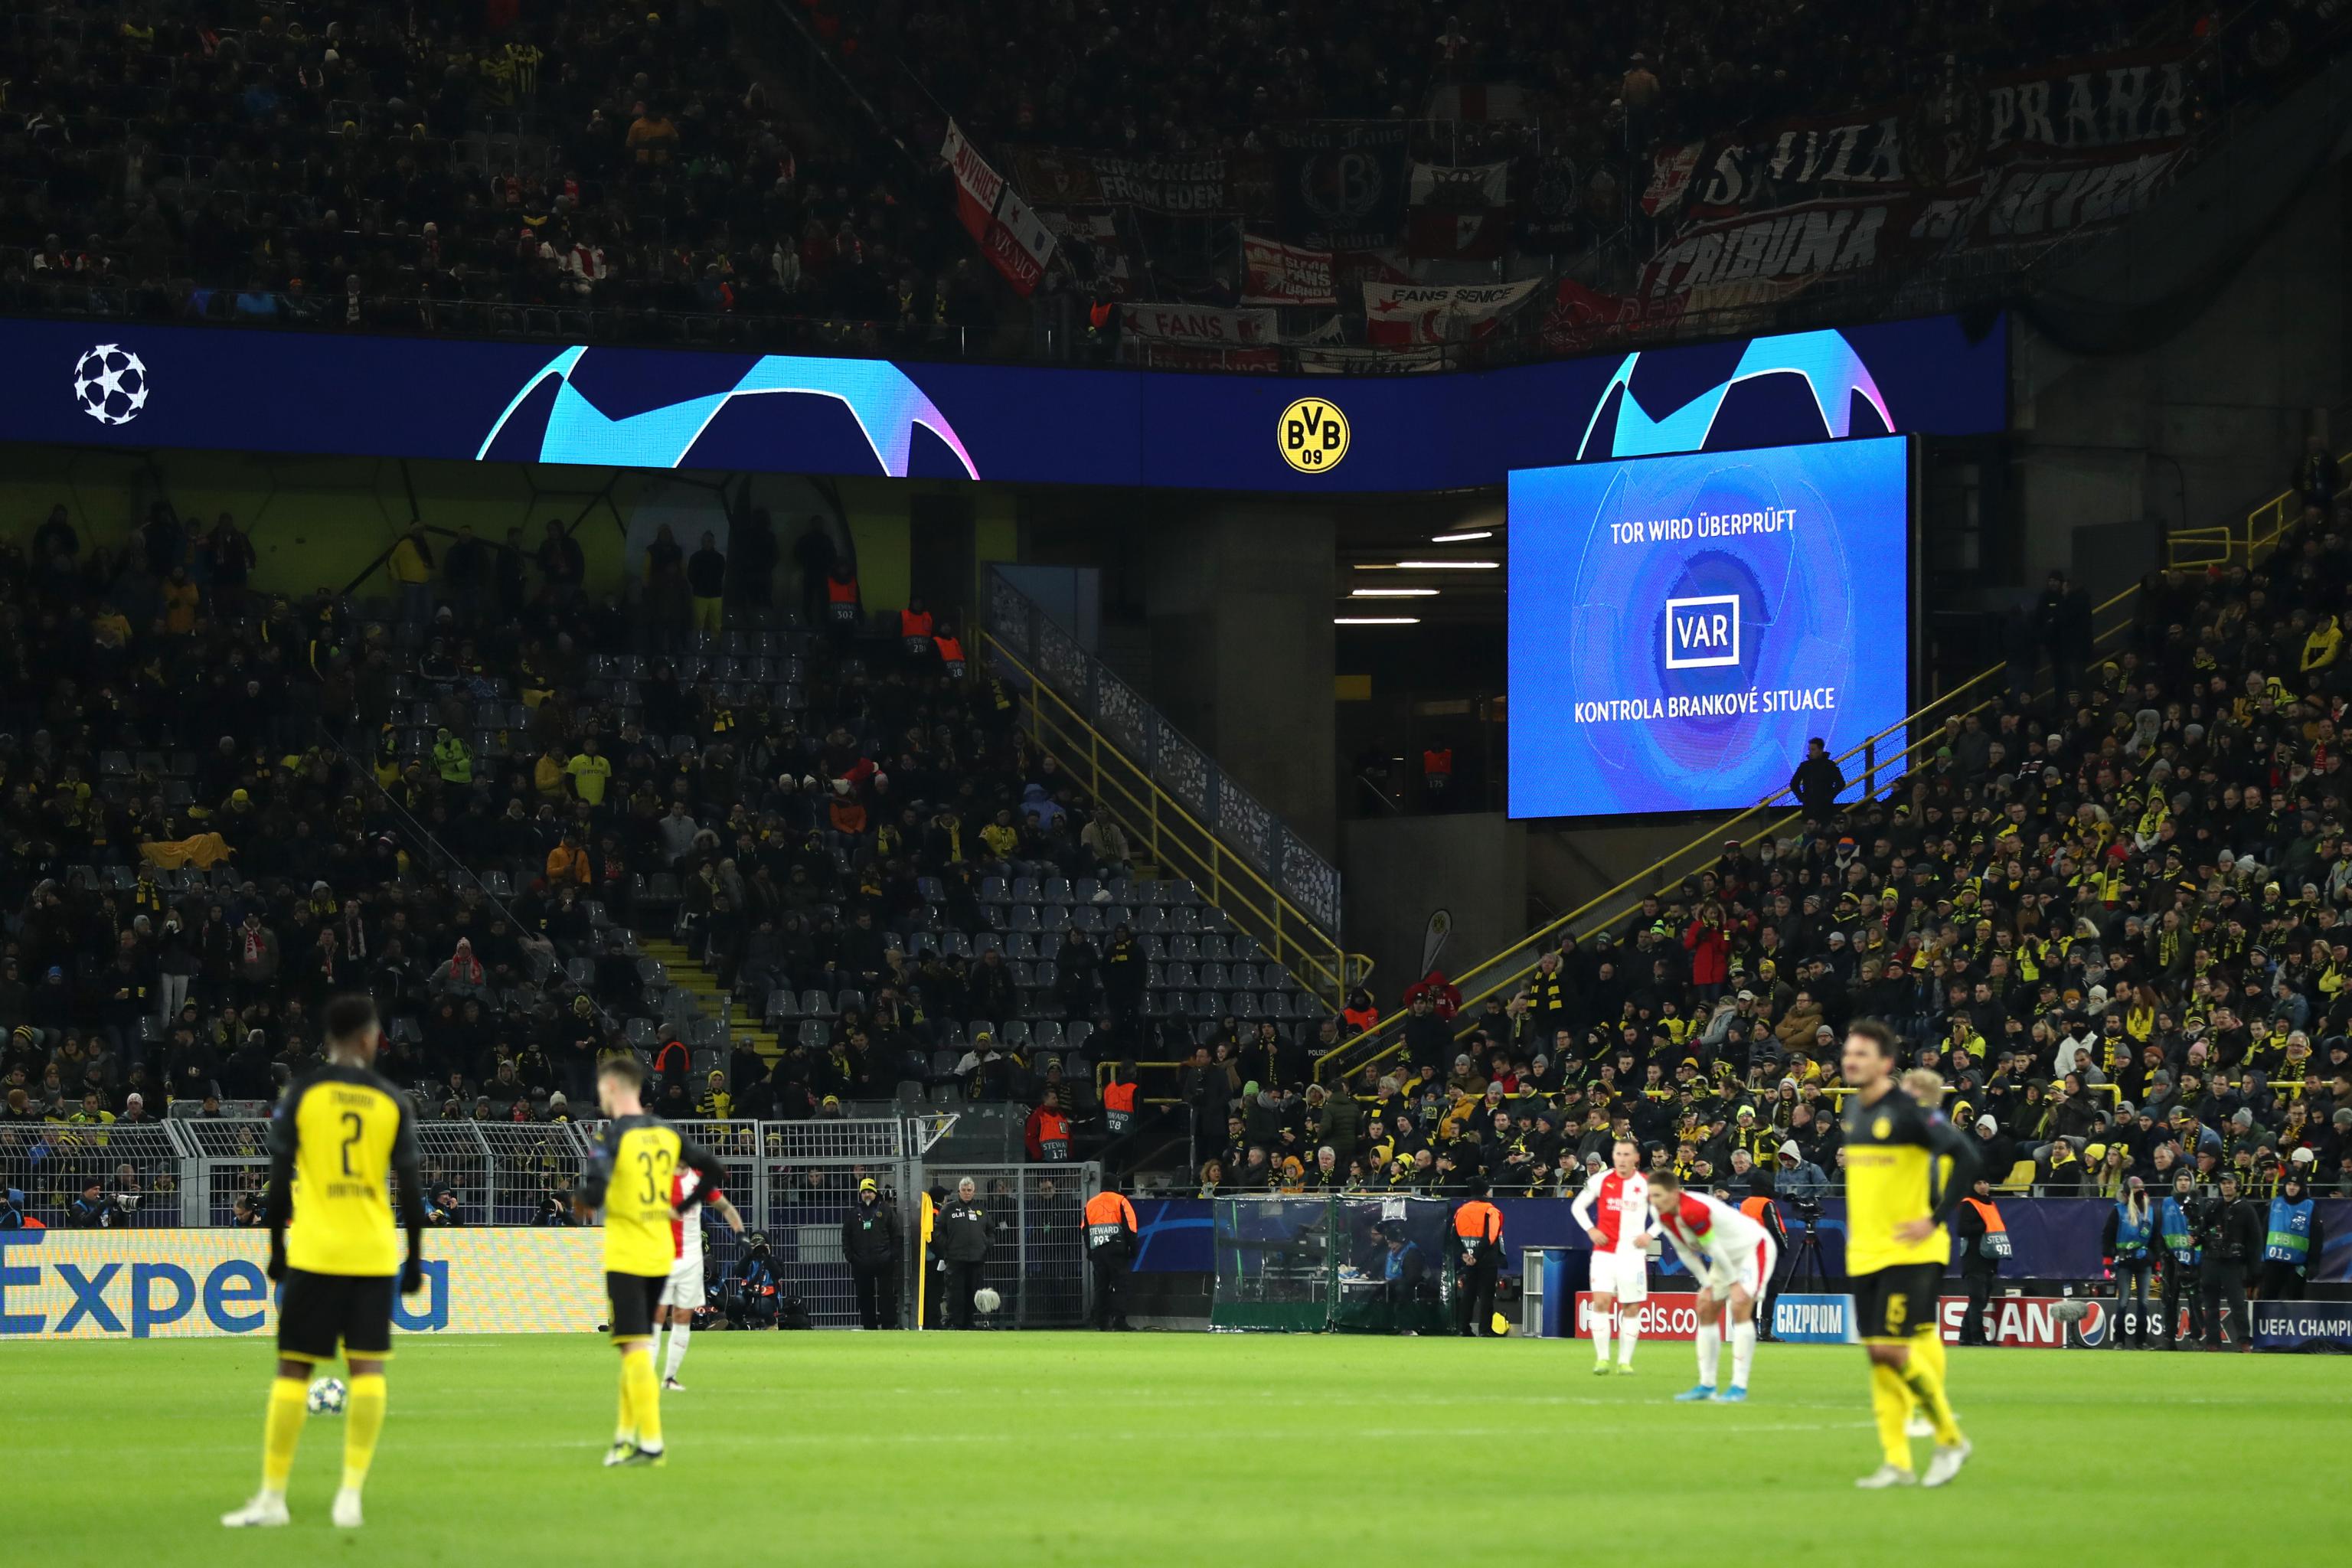 Uefa Confirm Var To Be Used In Europa League 2020 Knockout Stages